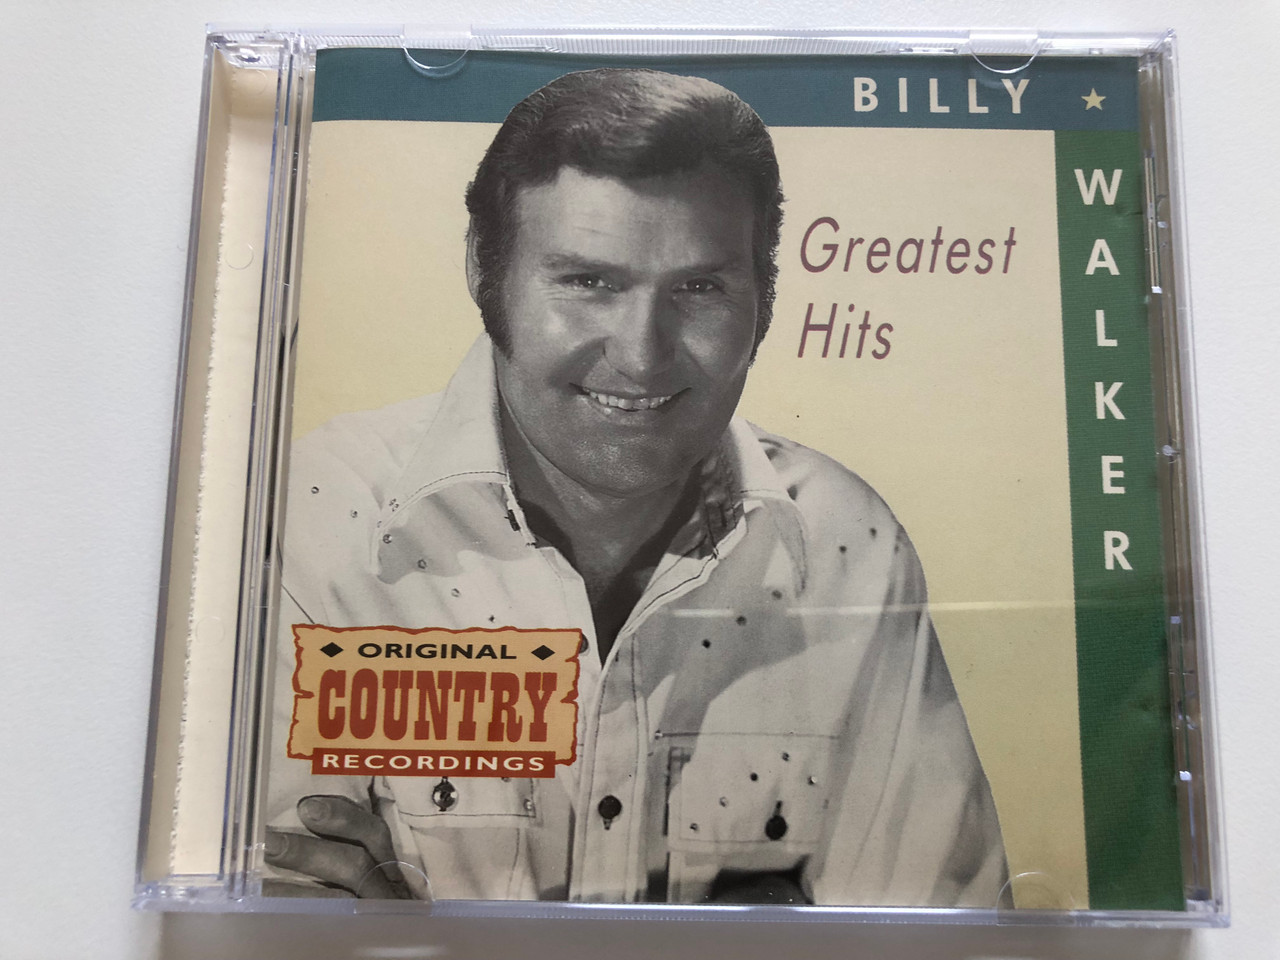 https://cdn10.bigcommerce.com/s-62bdpkt7pb/products/30724/images/181416/Billy_Walker_-_Greatest_Hits_Original_Country_Recordings_Point_Productions_Audio_CD_1992_2620612_1__50228.1623752262.1280.1280.JPG?c=2&_ga=2.137491126.787544708.1623769862-1646000393.1623769862